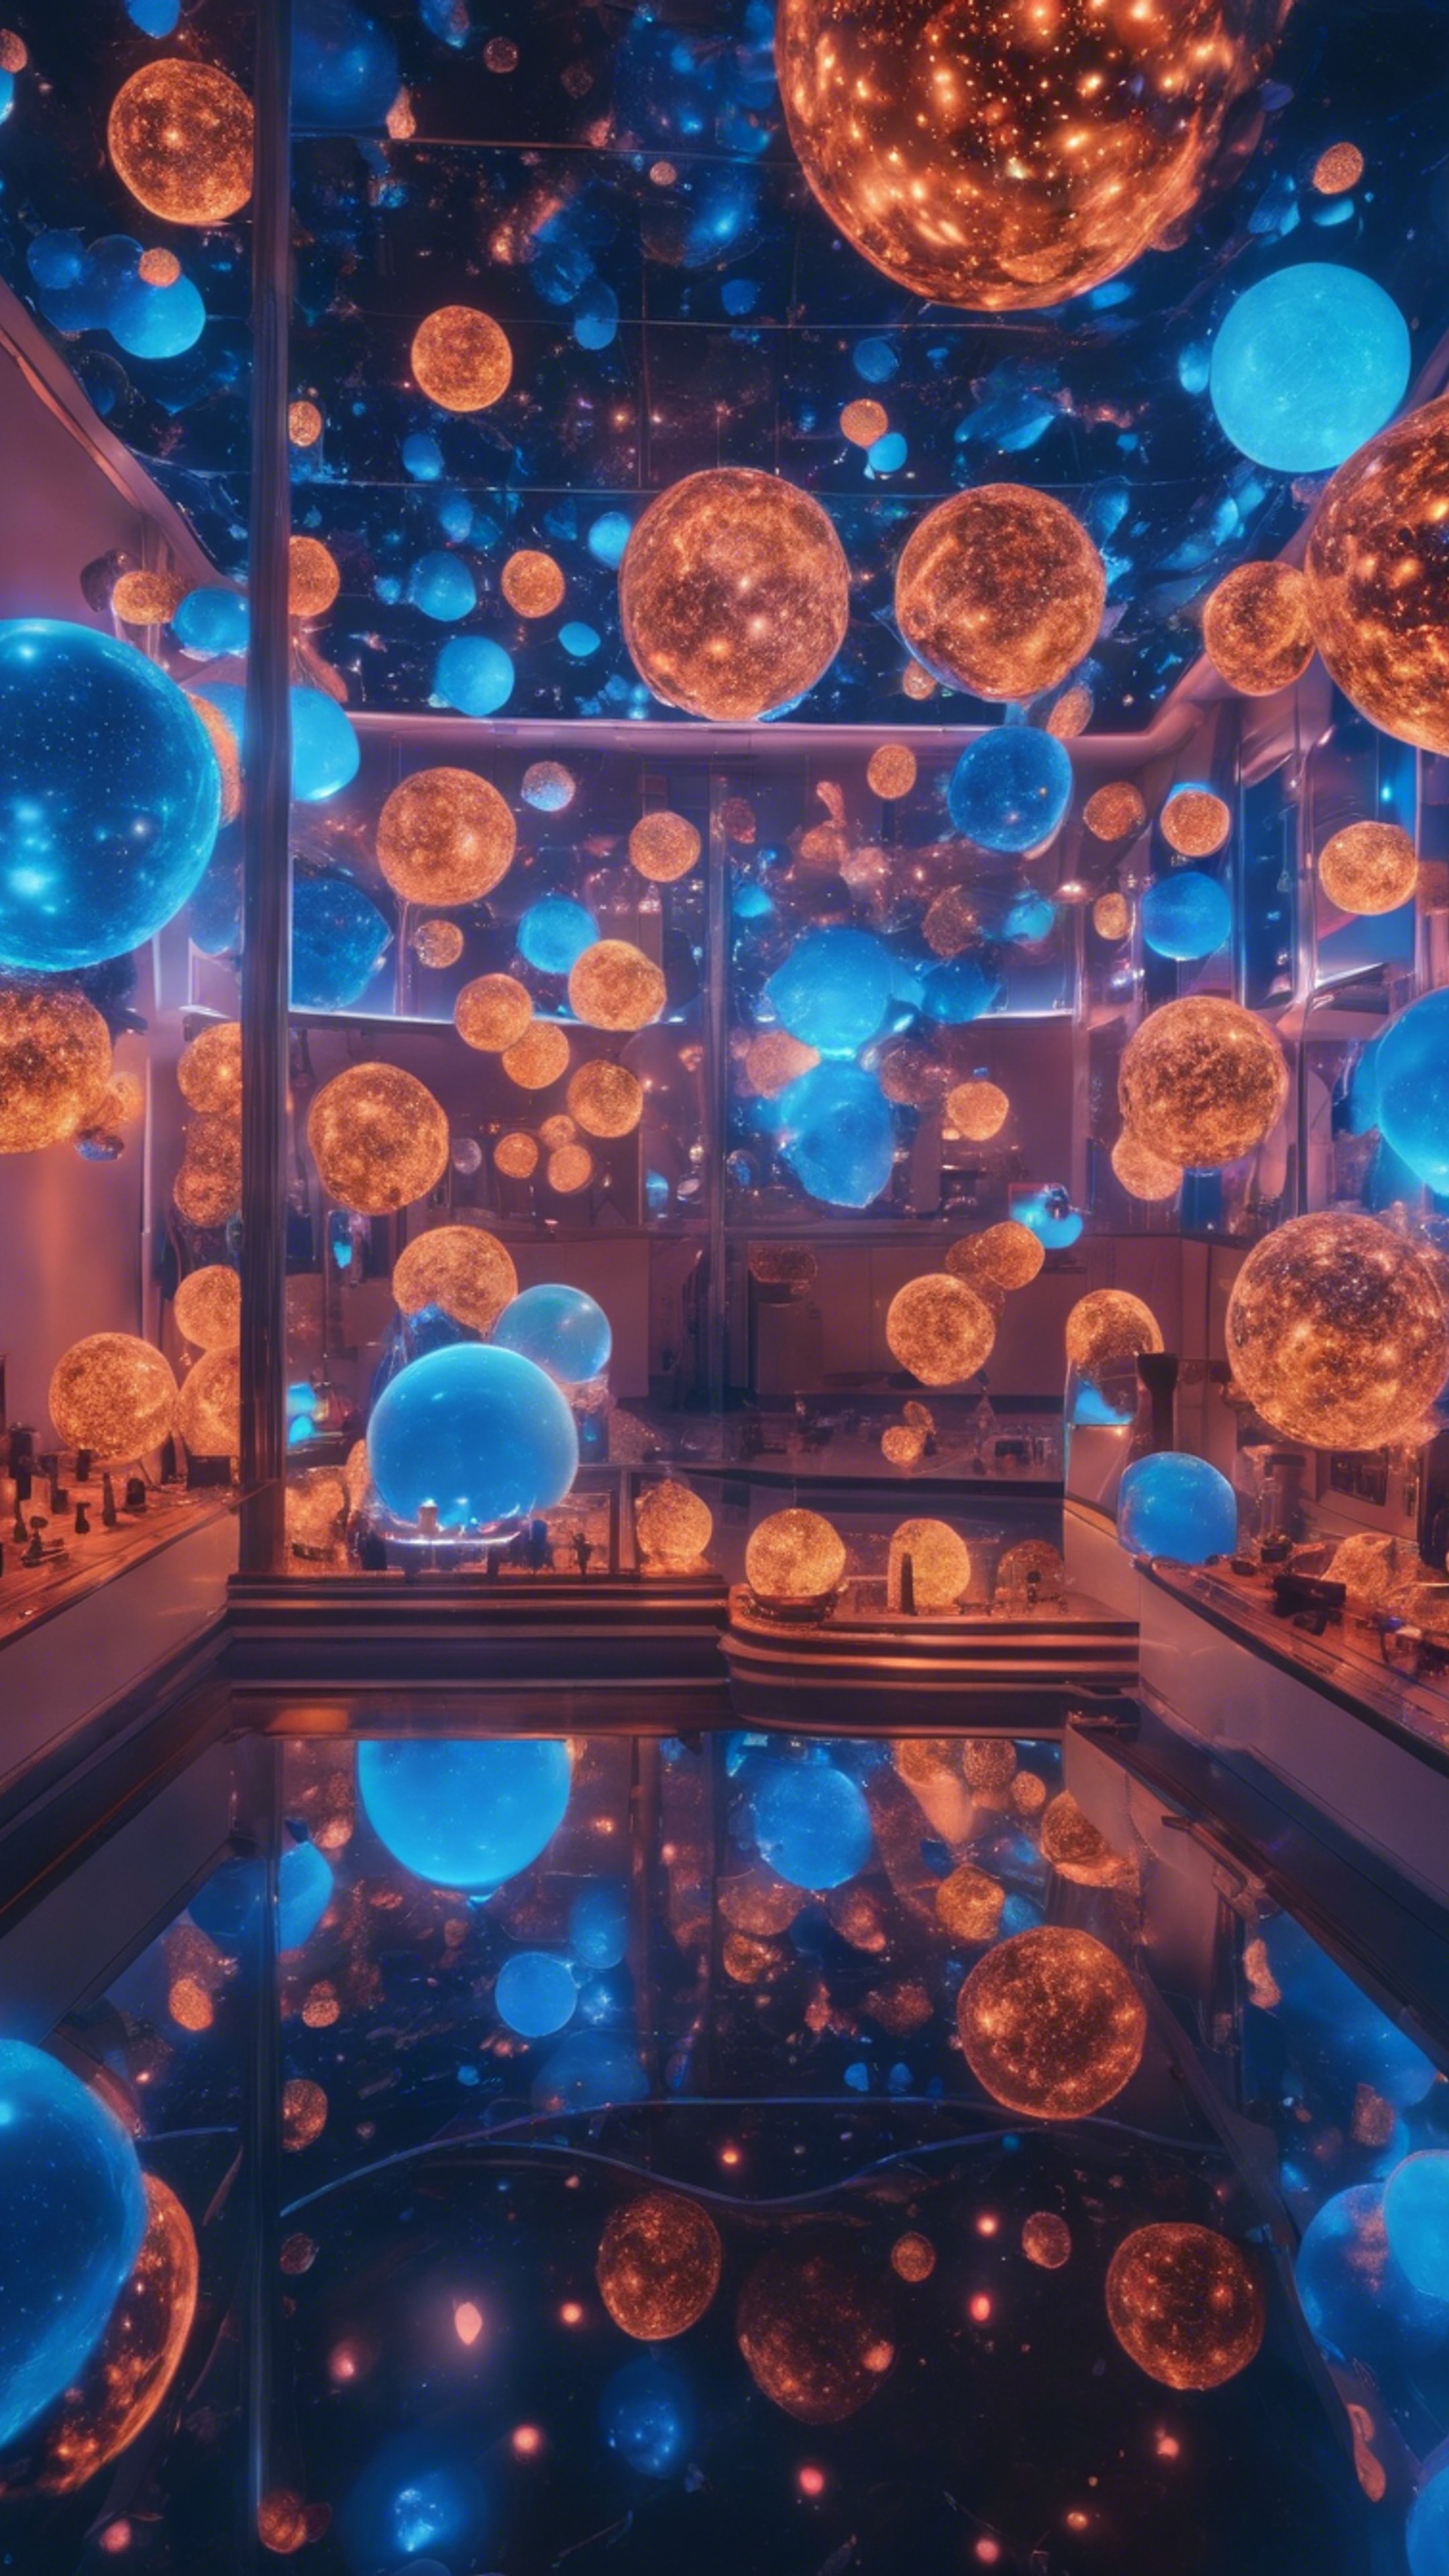 A surreal, neon blue museum in space, filled with floating orbs. Шпалери[35e461307c264e14b812]